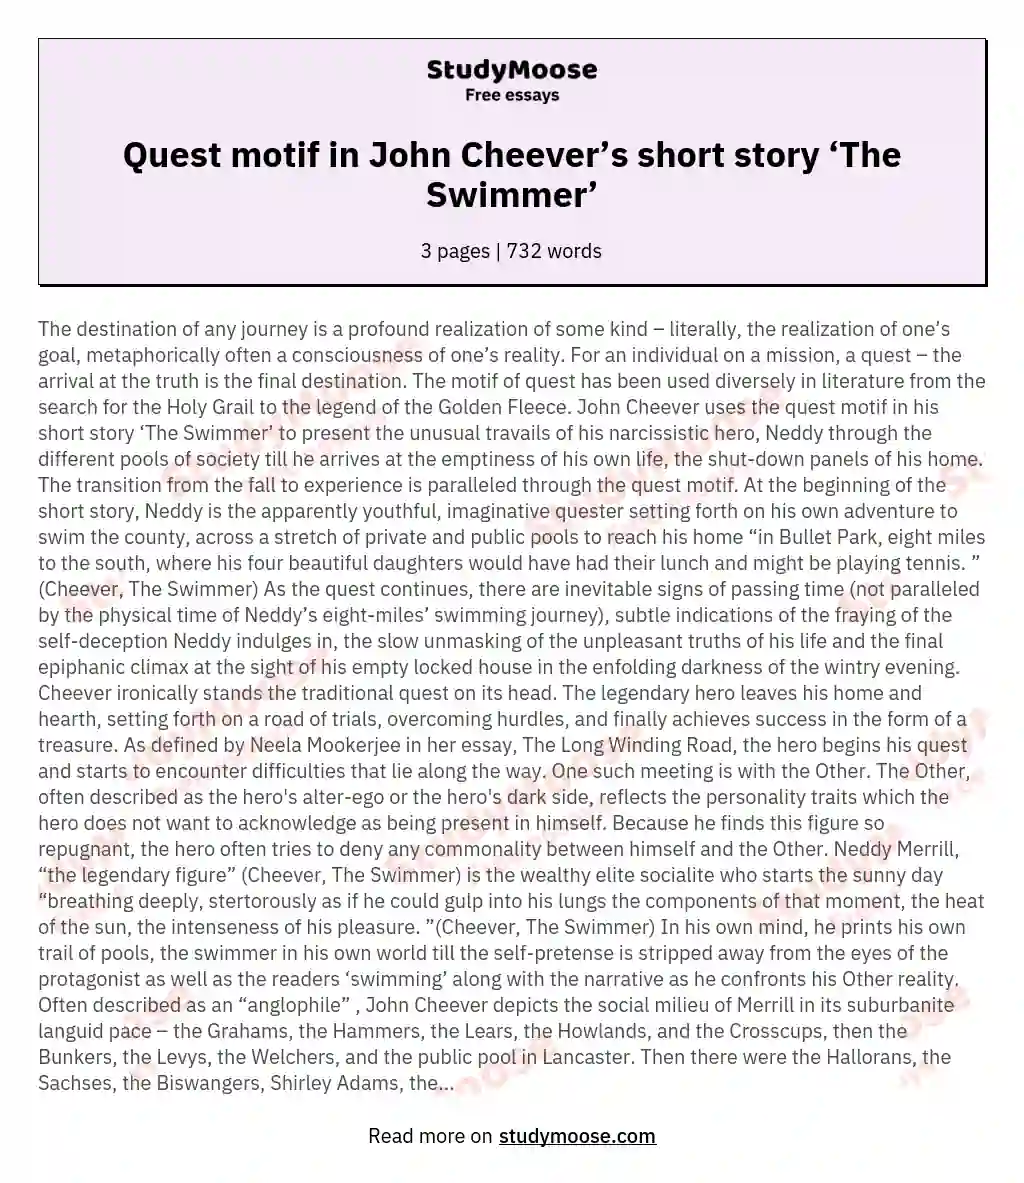 Quest motif in John Cheever’s short story ‘The Swimmer’